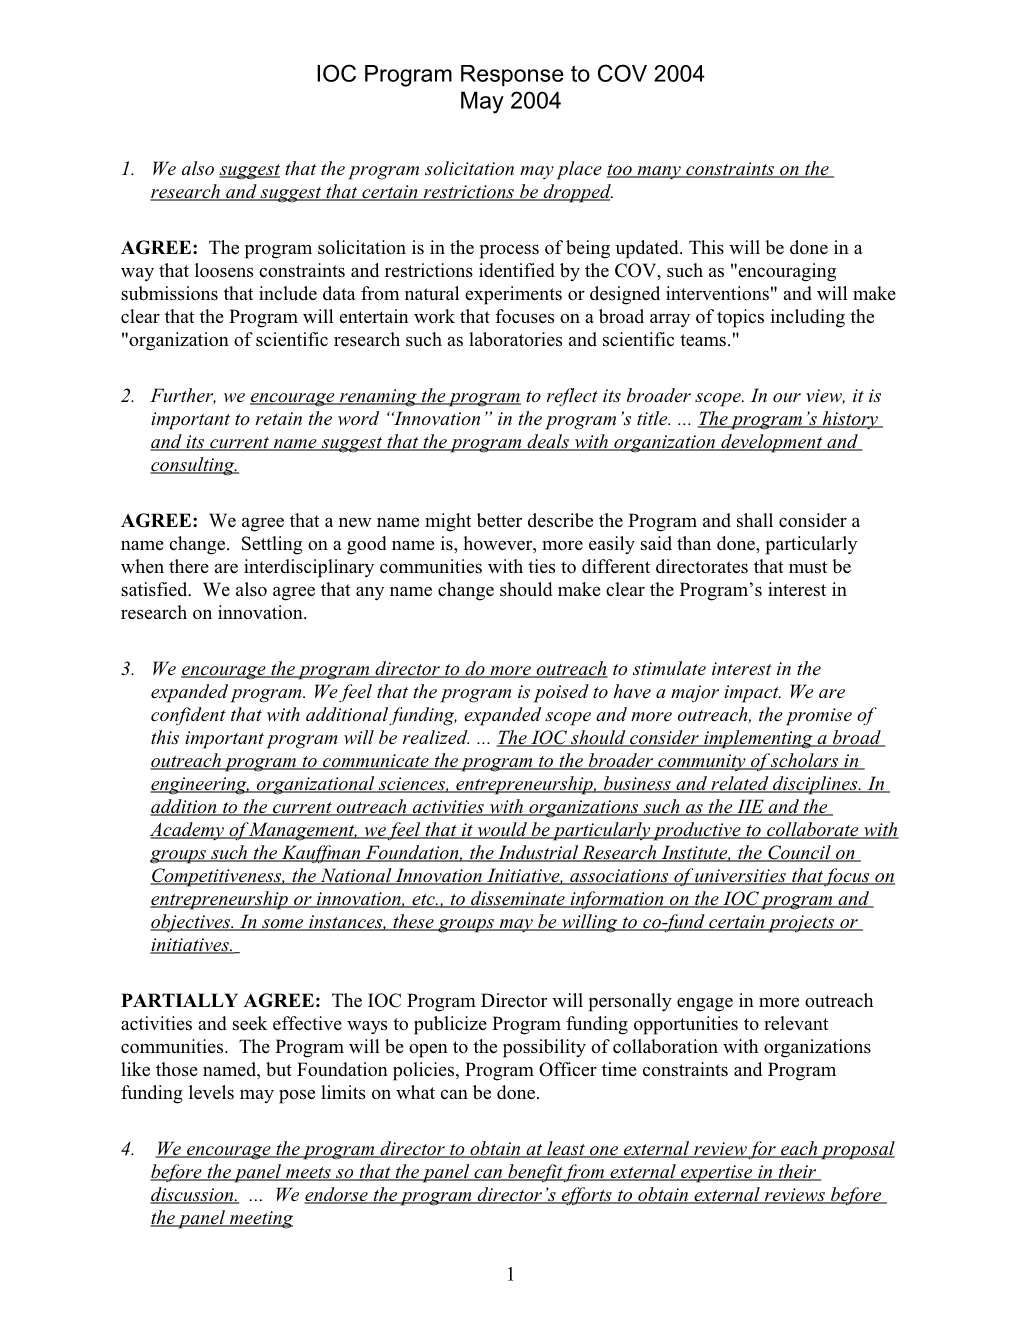 MODIFIED FINAL 1 NSF FY 2004 CORE QUESTIONS for Covs FY 2004 REPORT TEMPLATE for NSF COMMITTEES